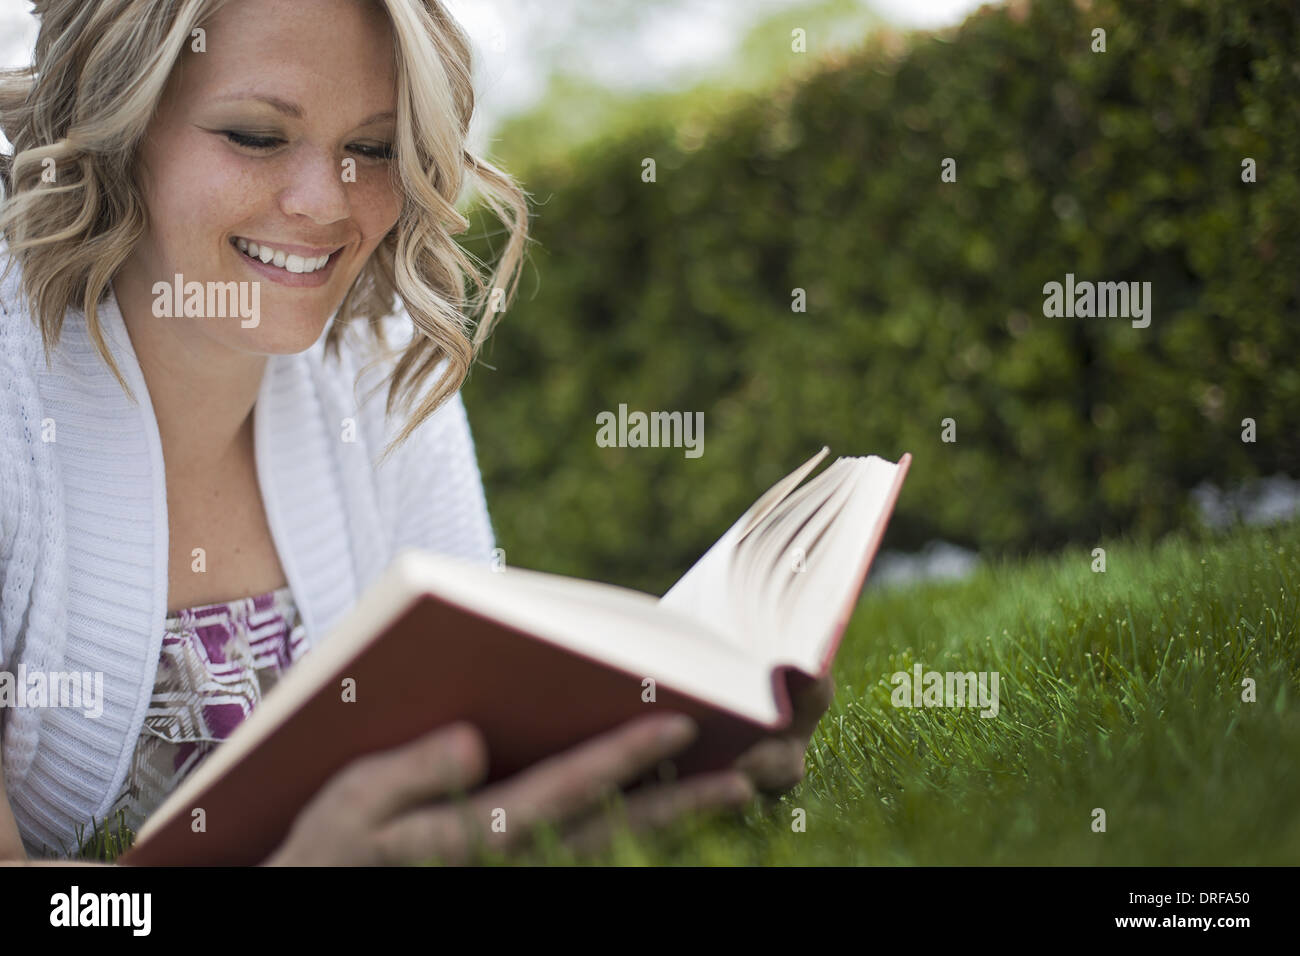 Utah USA girl sitting on the grass in garden reading book Banque D'Images